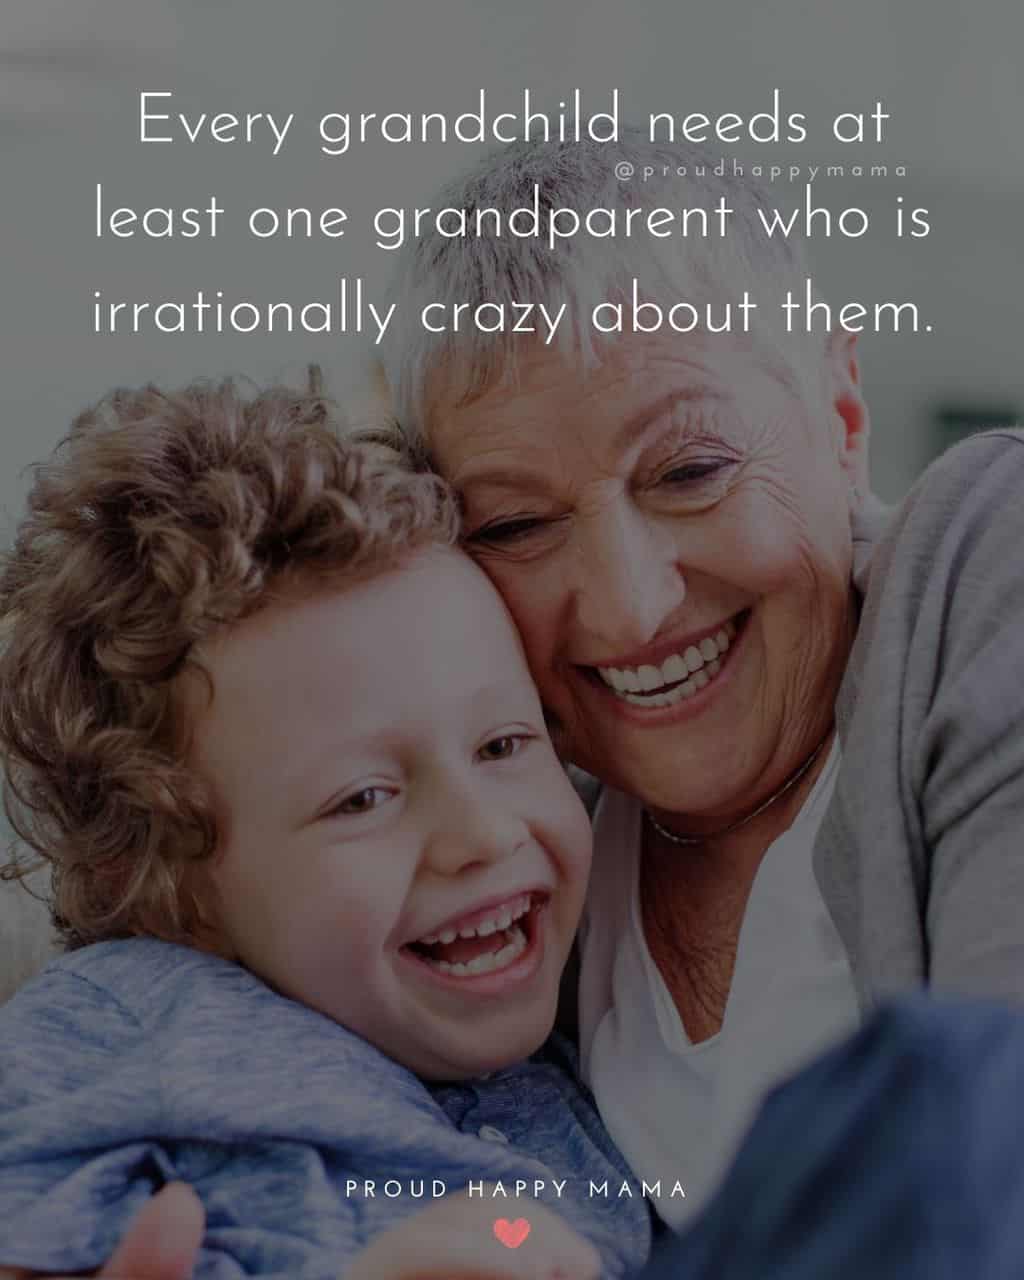 Grandparent Quotes – Every grandchild needs at least one grandparent who is irrationally crazy about them.’